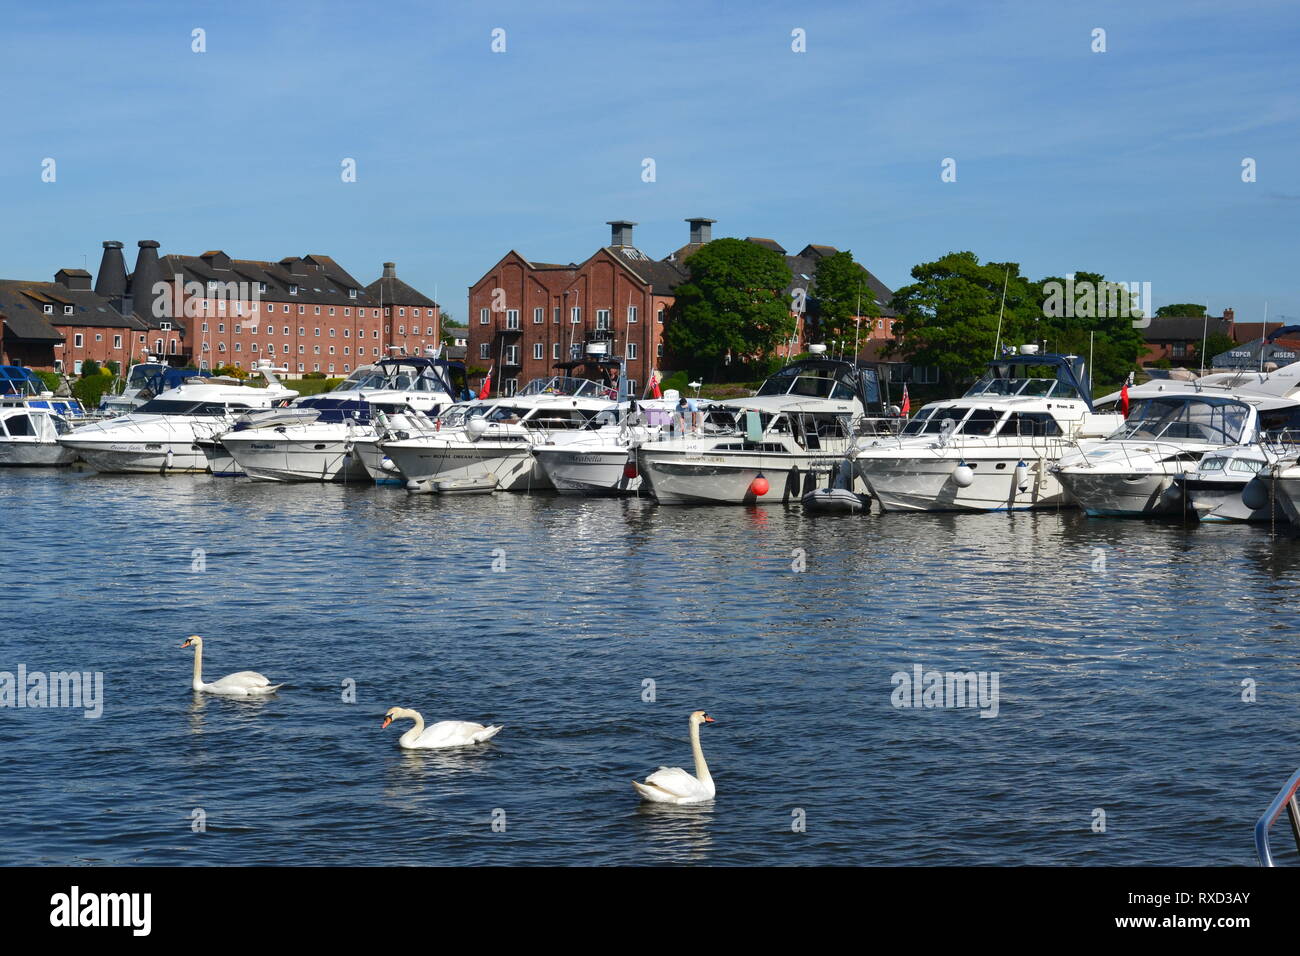 Swans in front of the yachts moored on Oulton Broad, Suffolk, UK Stock Photo